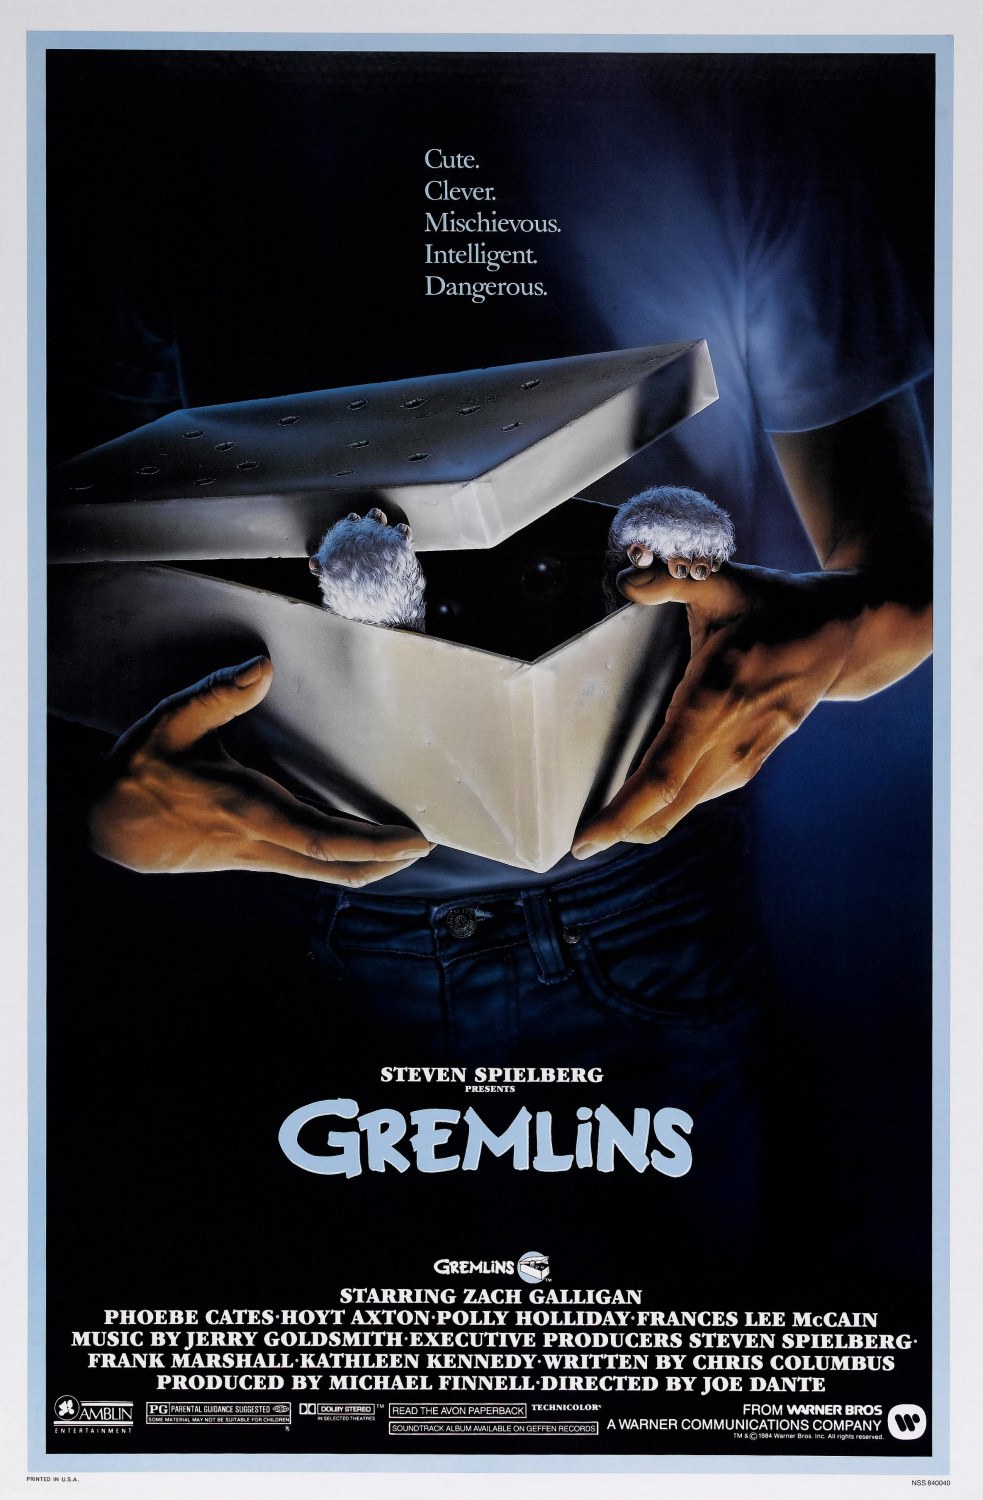 Gremlins (1984) – CHRISTMAS HORROR MOVIE REVIEW